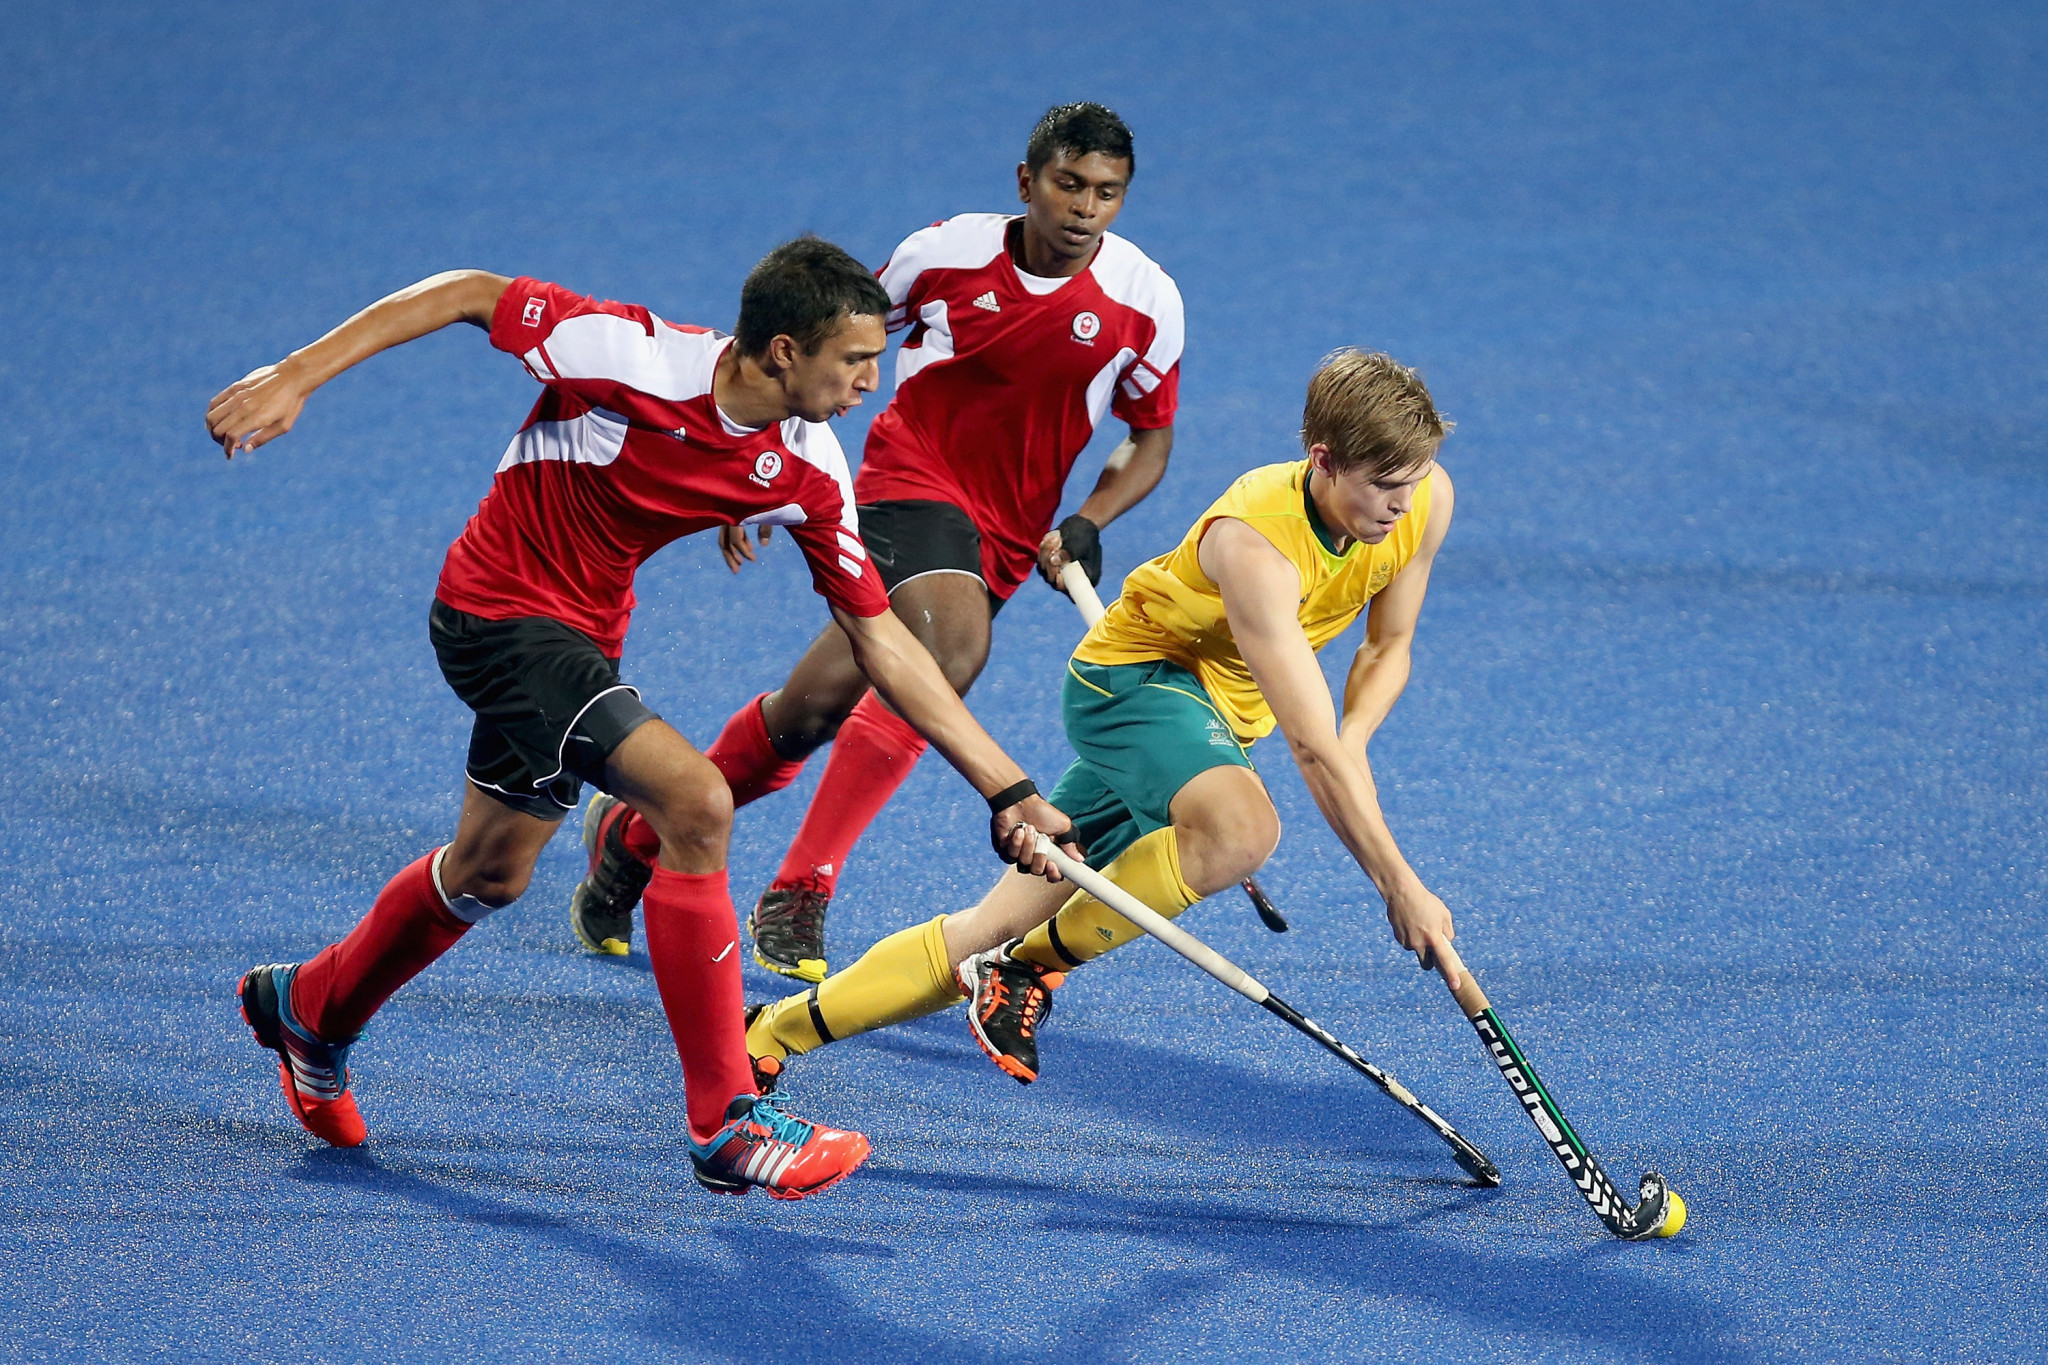 Hockey5s was played at the Buenos Aires 2018 Youth Olympics ©Getty Images